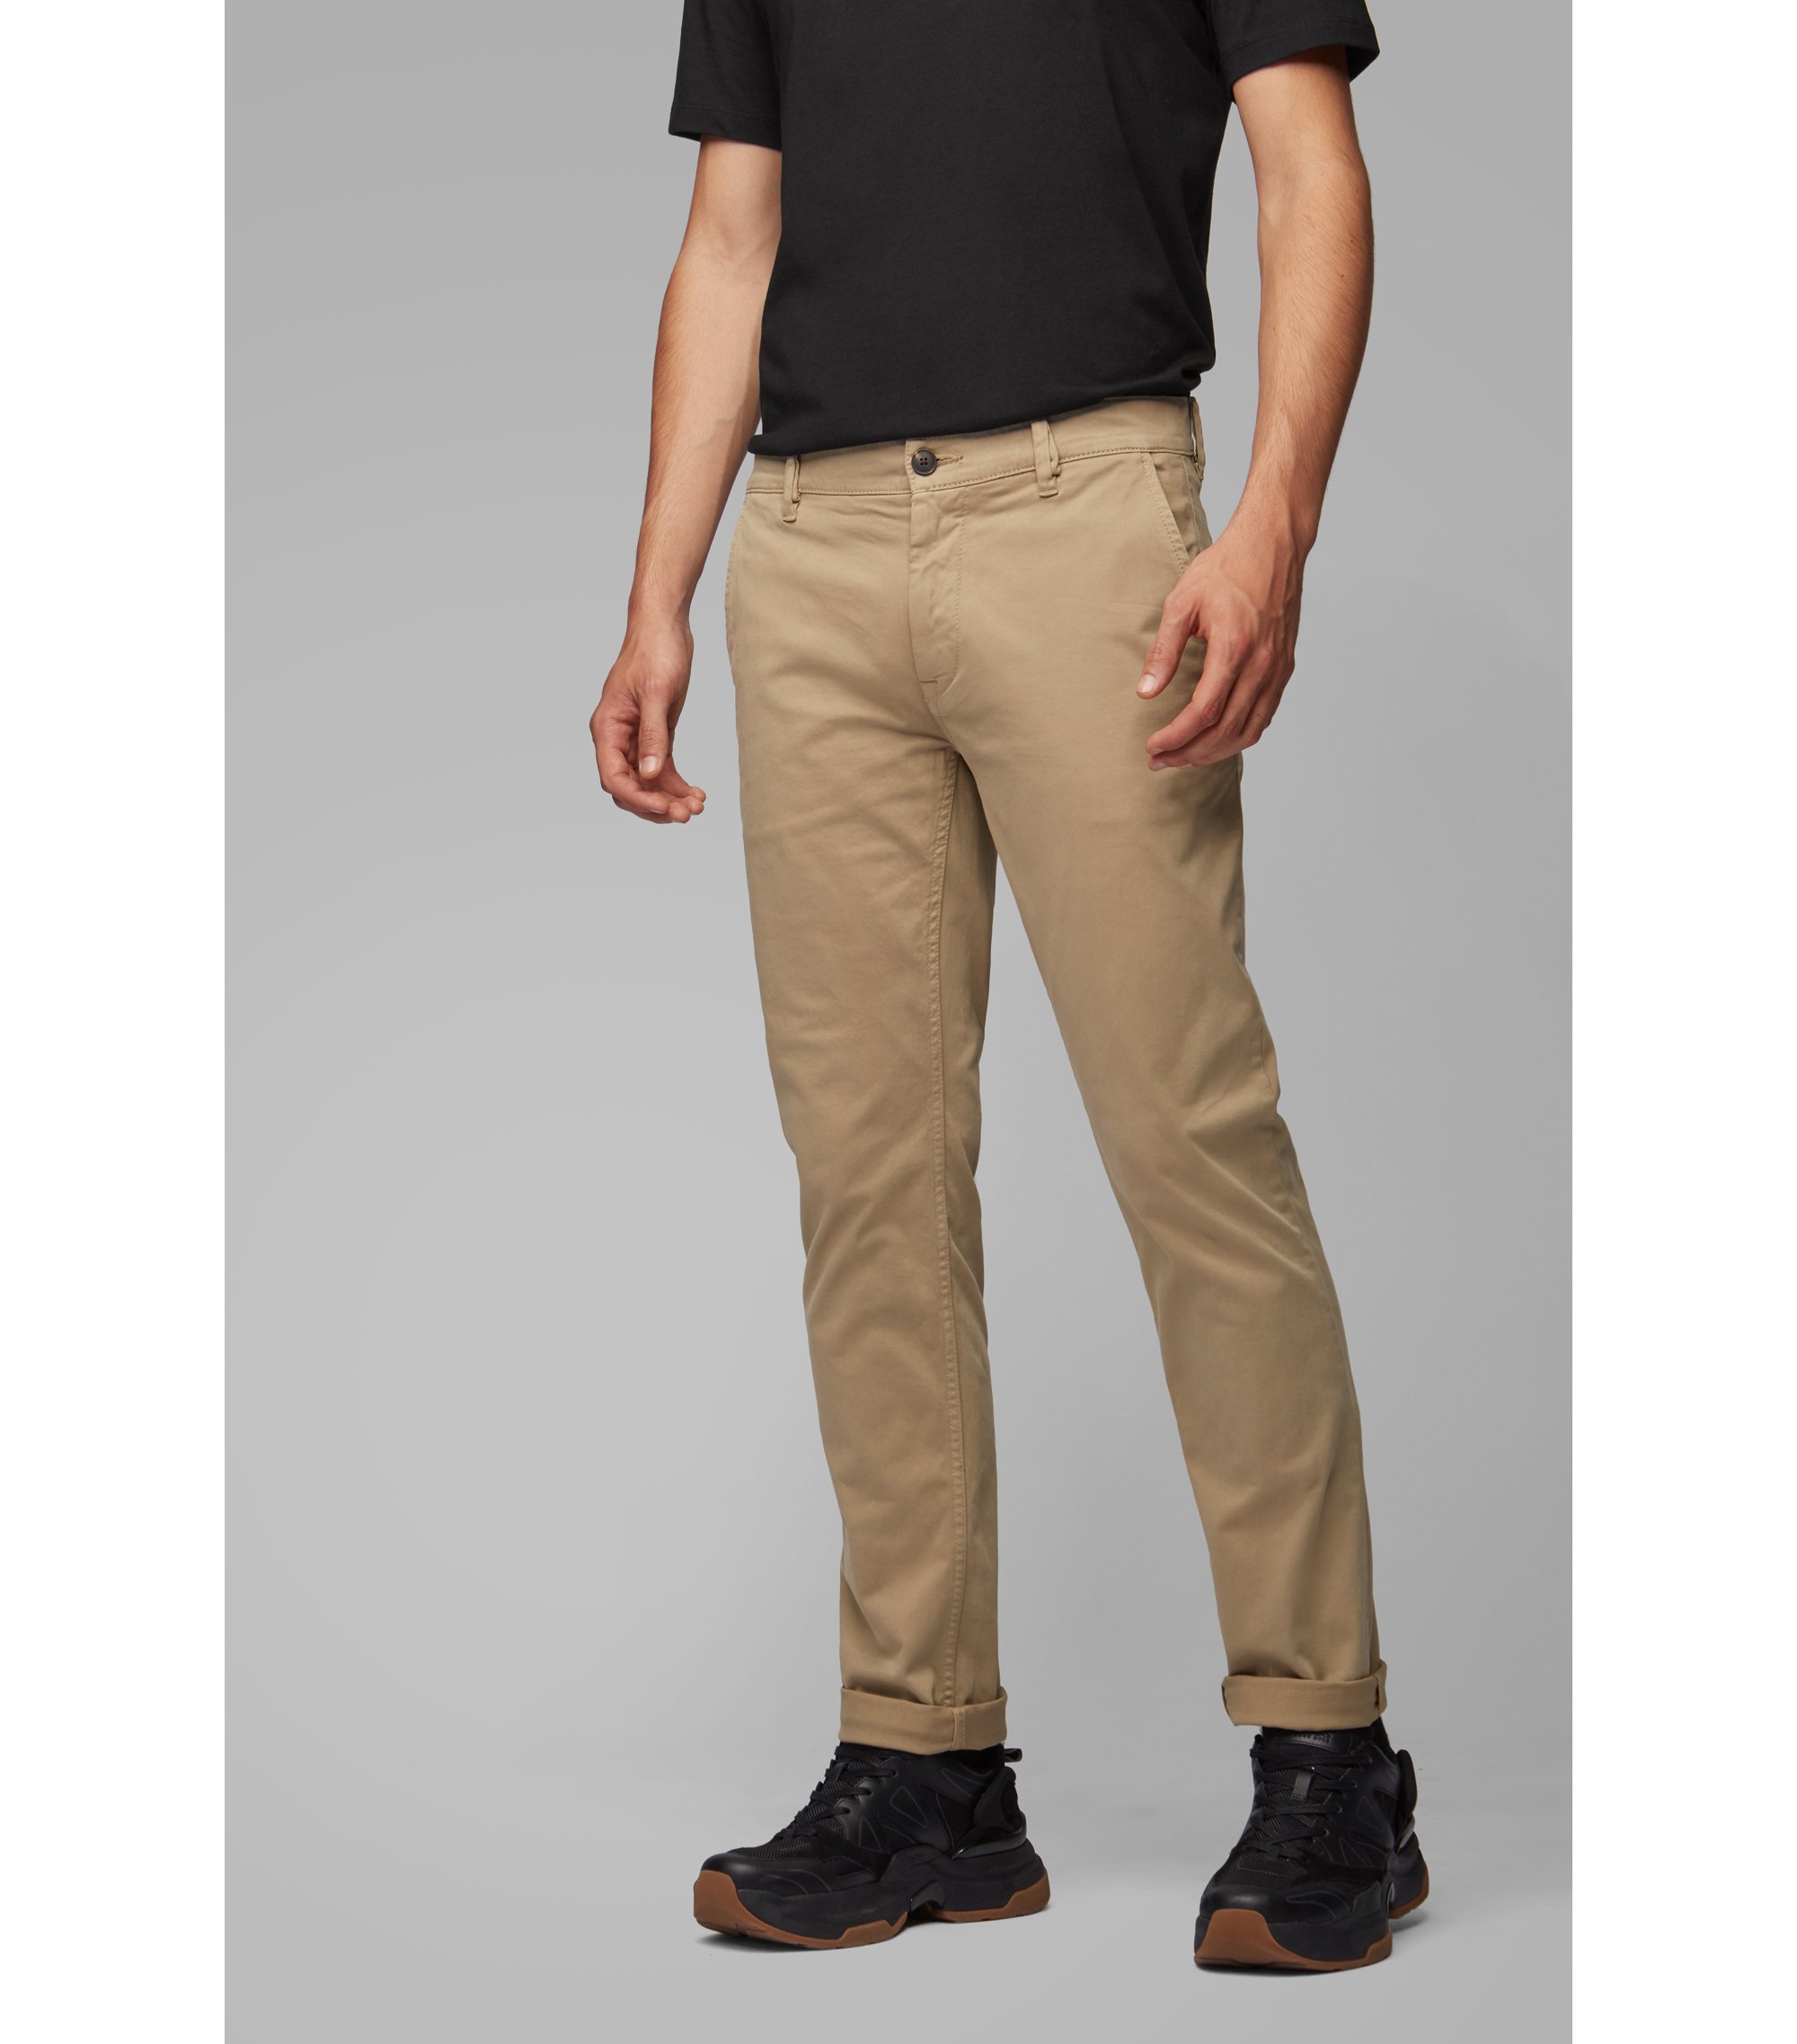 Hugo Boss Slim-fit casual chinos in brushed stretch cotton  Beige  RRP £89